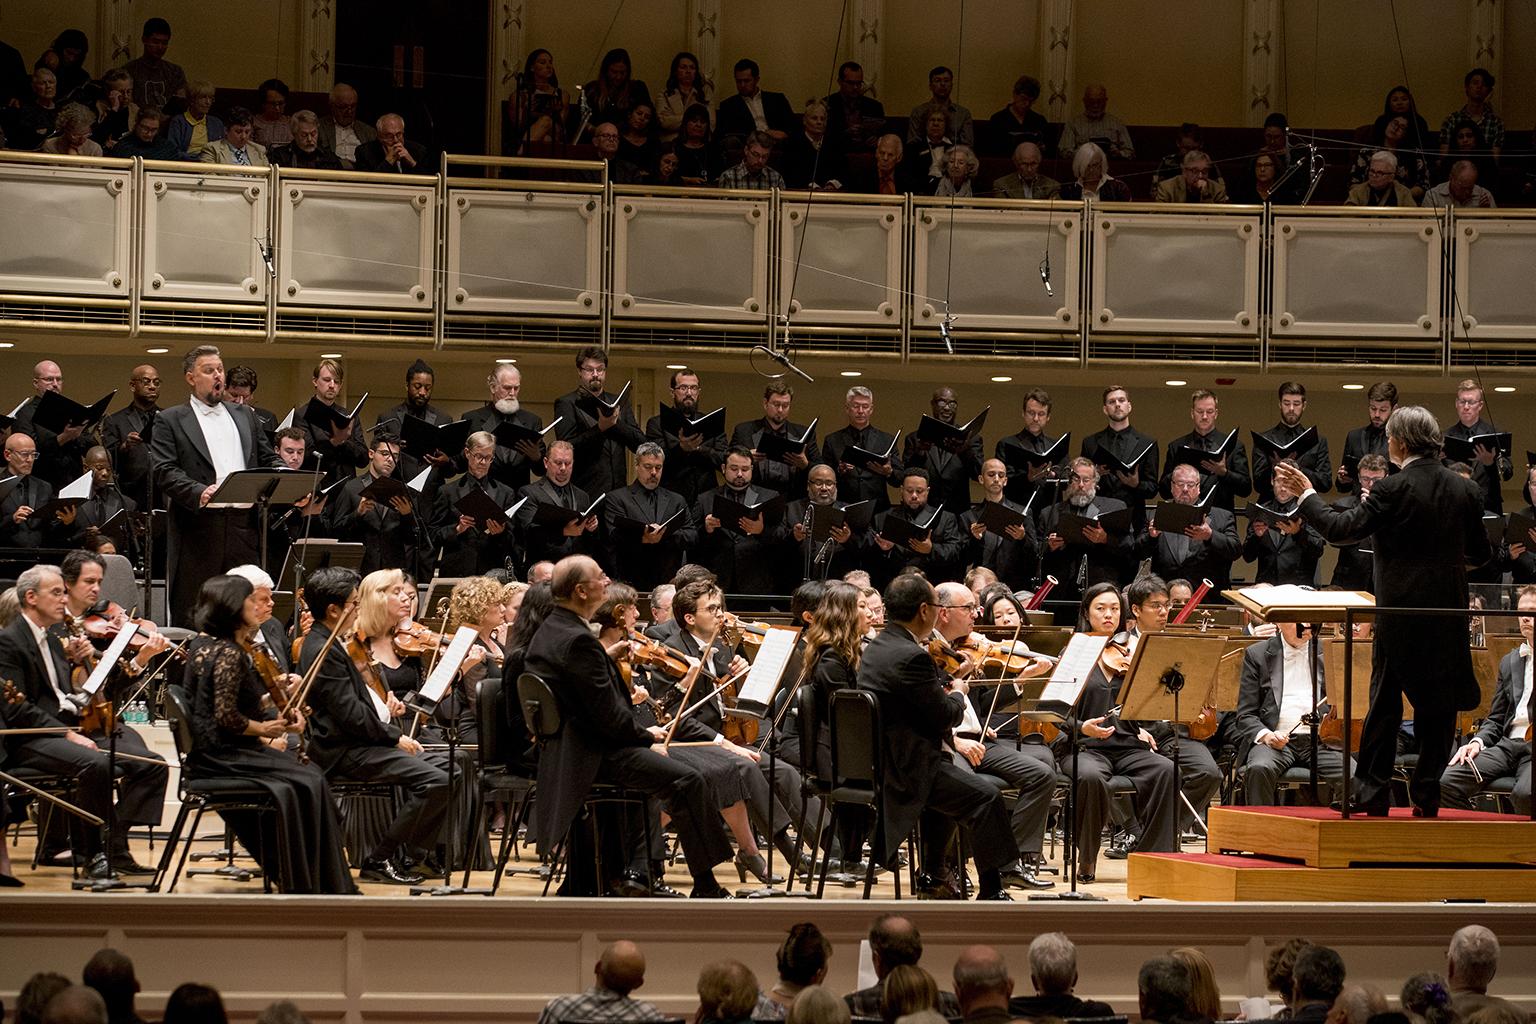 Zell Music Director Riccardo Muti leads the CSO in its first subscription concert of the season featuring Shostakovich’s Symphony No. 13 (“Babi Yar”). (Photo credit: Todd Rosenberg)